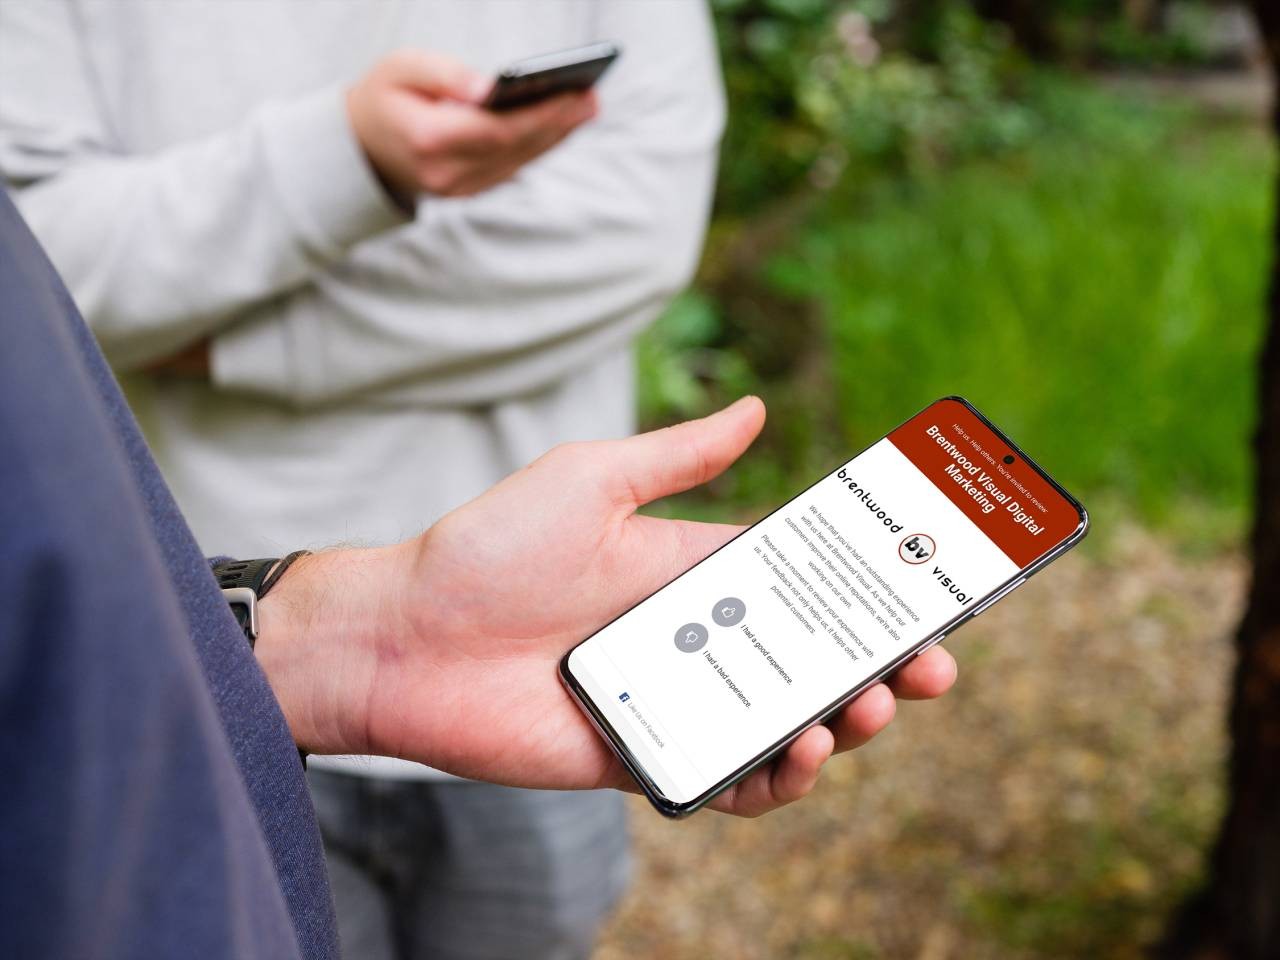 Mobile phone in the hand showing online reviews page